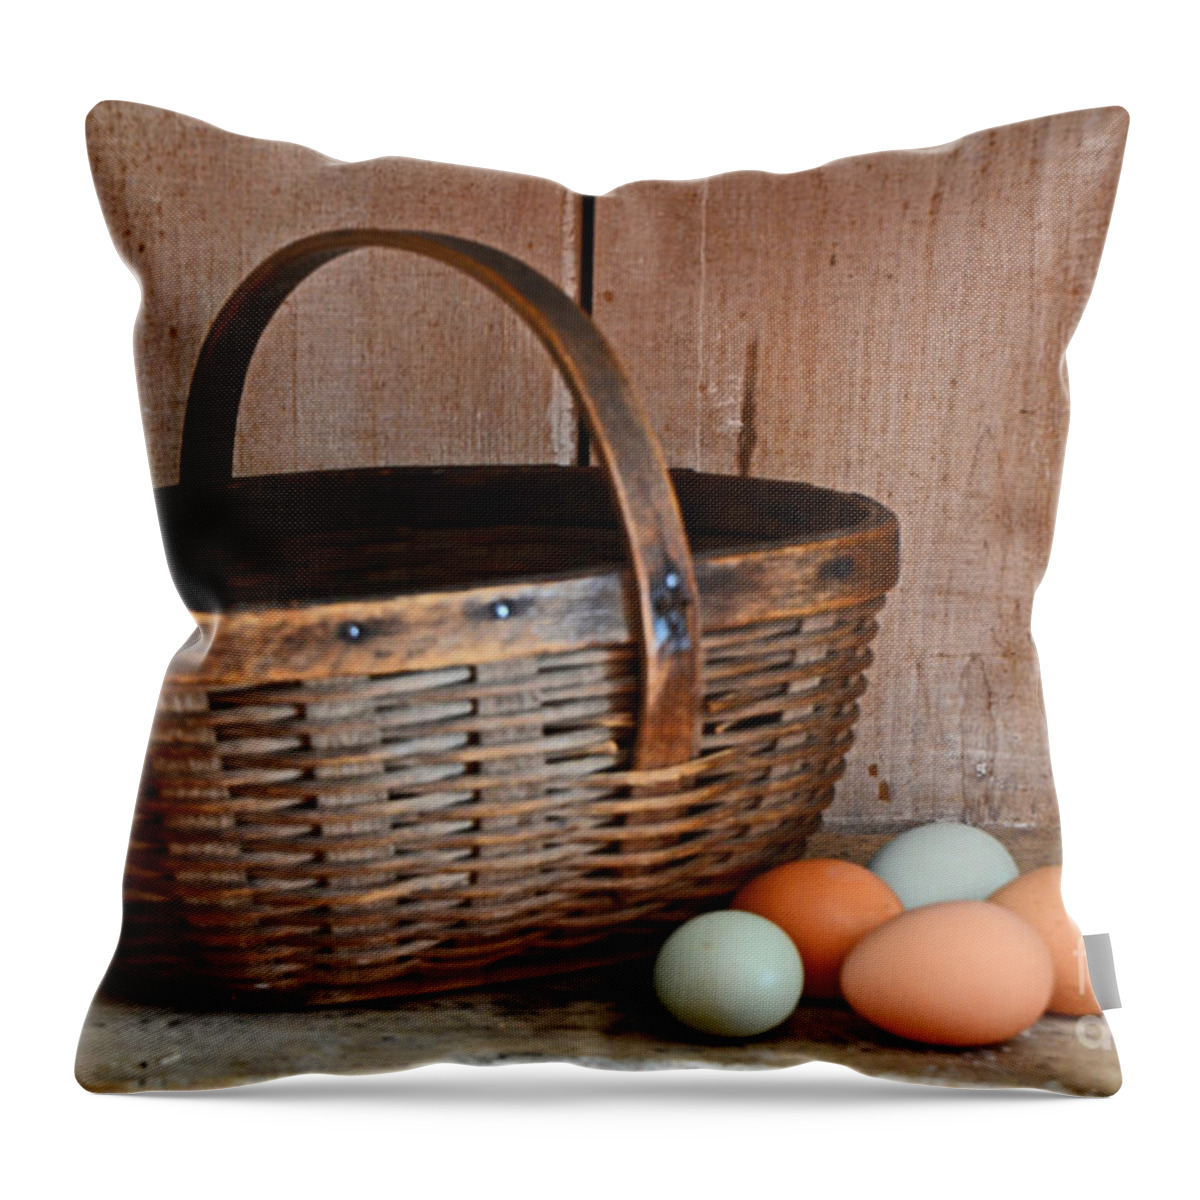 Still Life Throw Pillow featuring the photograph My Grandma's Egg Basket by Mary Carol Story